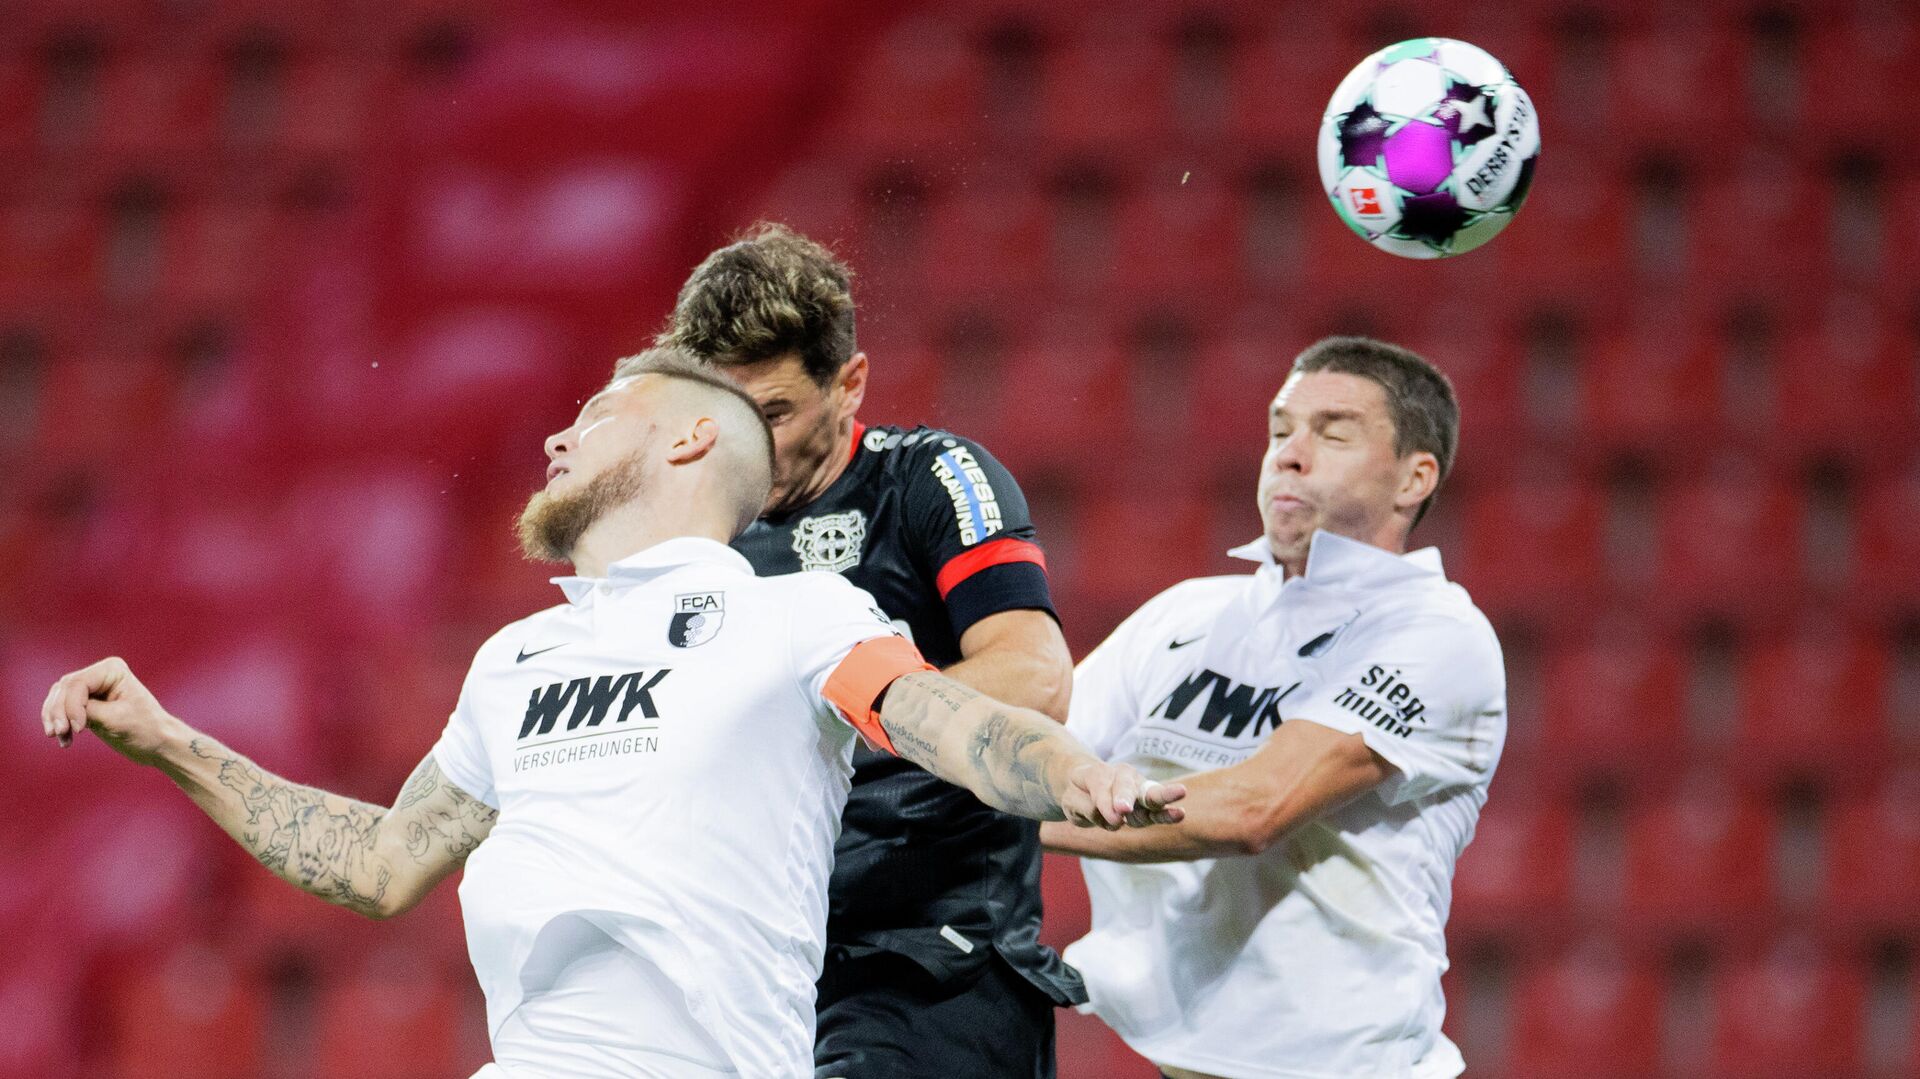 Leverkusen's Italian forward Lucas Alario (M), Augsburg's Dutch defender Jeffrey Gouweleeuw (L) and Augsburg's German defender Raphael Framberger vie for the ball during the German first division Bundesliga football match Bayer 04 Leverkusen v FC Augsburg, in Leverkusen, western Germany, on October 26, 2020. (Photo by Rolf Vennenbernd / POOL / AFP) / DFL REGULATIONS PROHIBIT ANY USE OF PHOTOGRAPHS AS IMAGE SEQUENCES AND/OR QUASI-VIDEO - РИА Новости, 1920, 27.10.2020